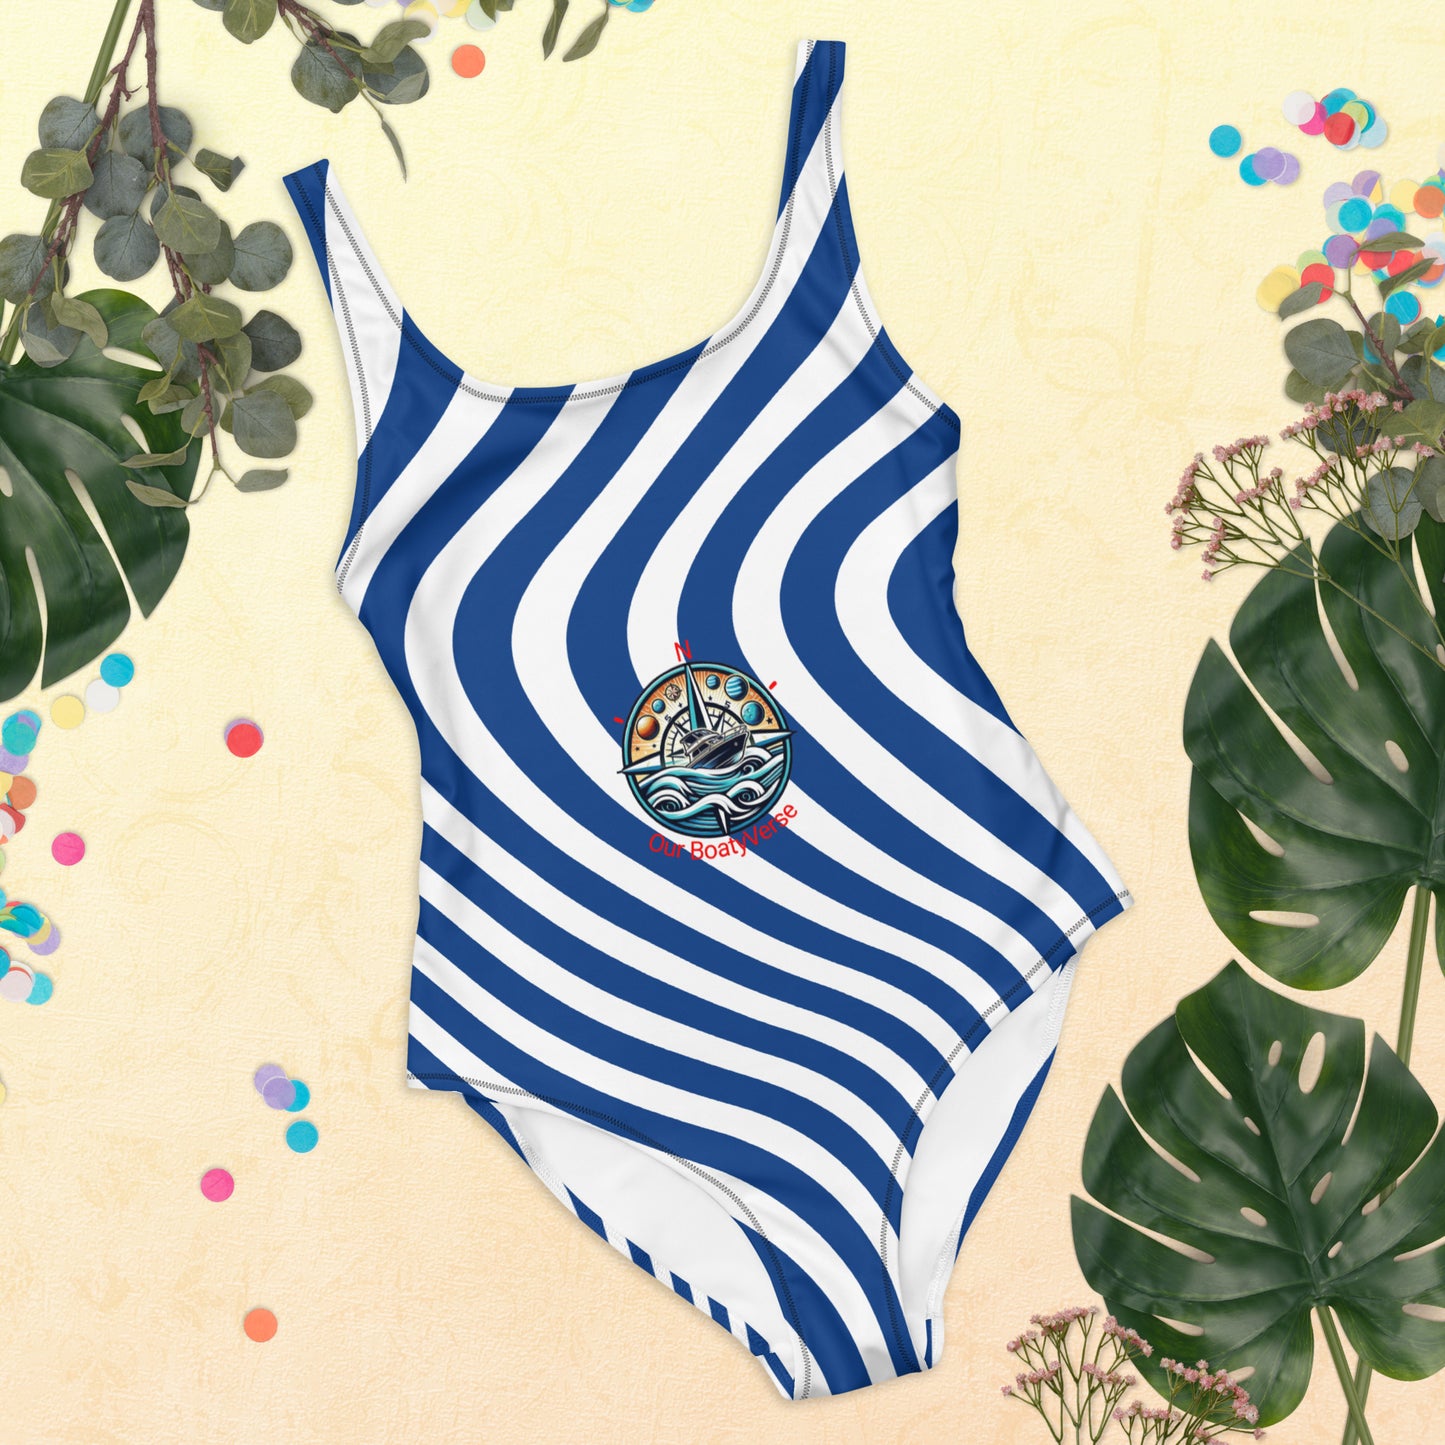 Summer Vibes Collection One-Piece Swimsuit by Our BoatyVerse